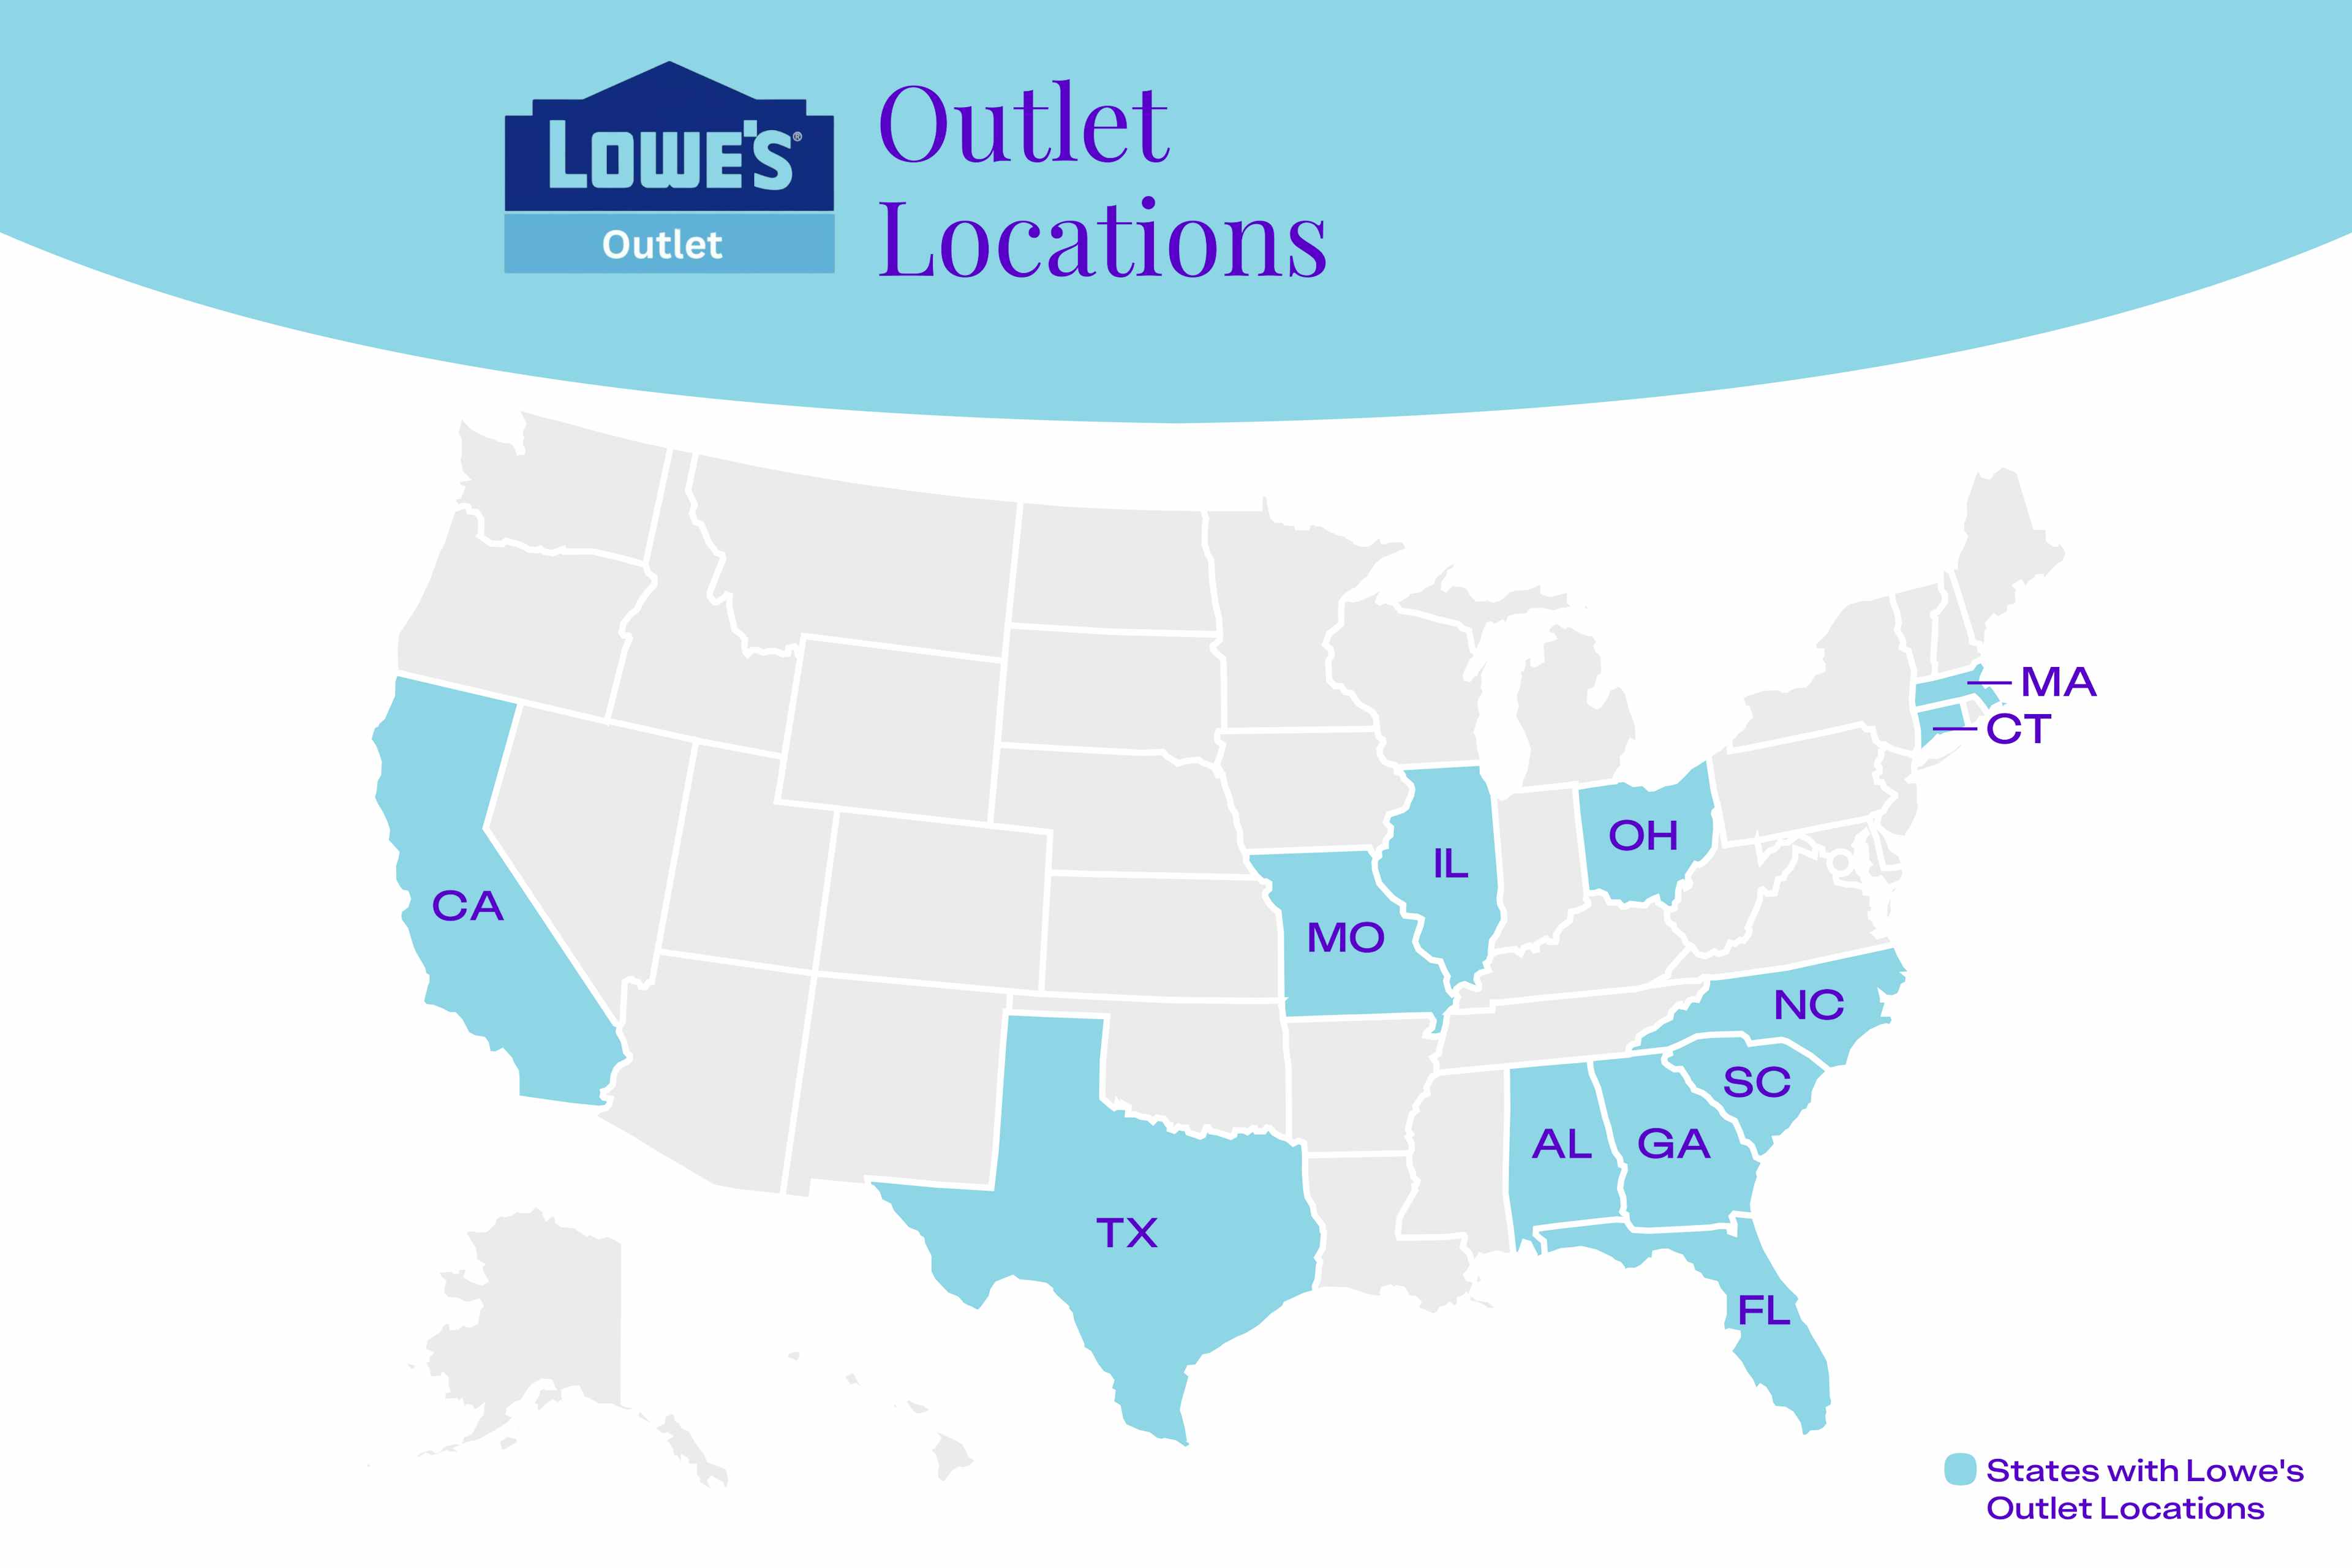 Lowe-s Outlet locations